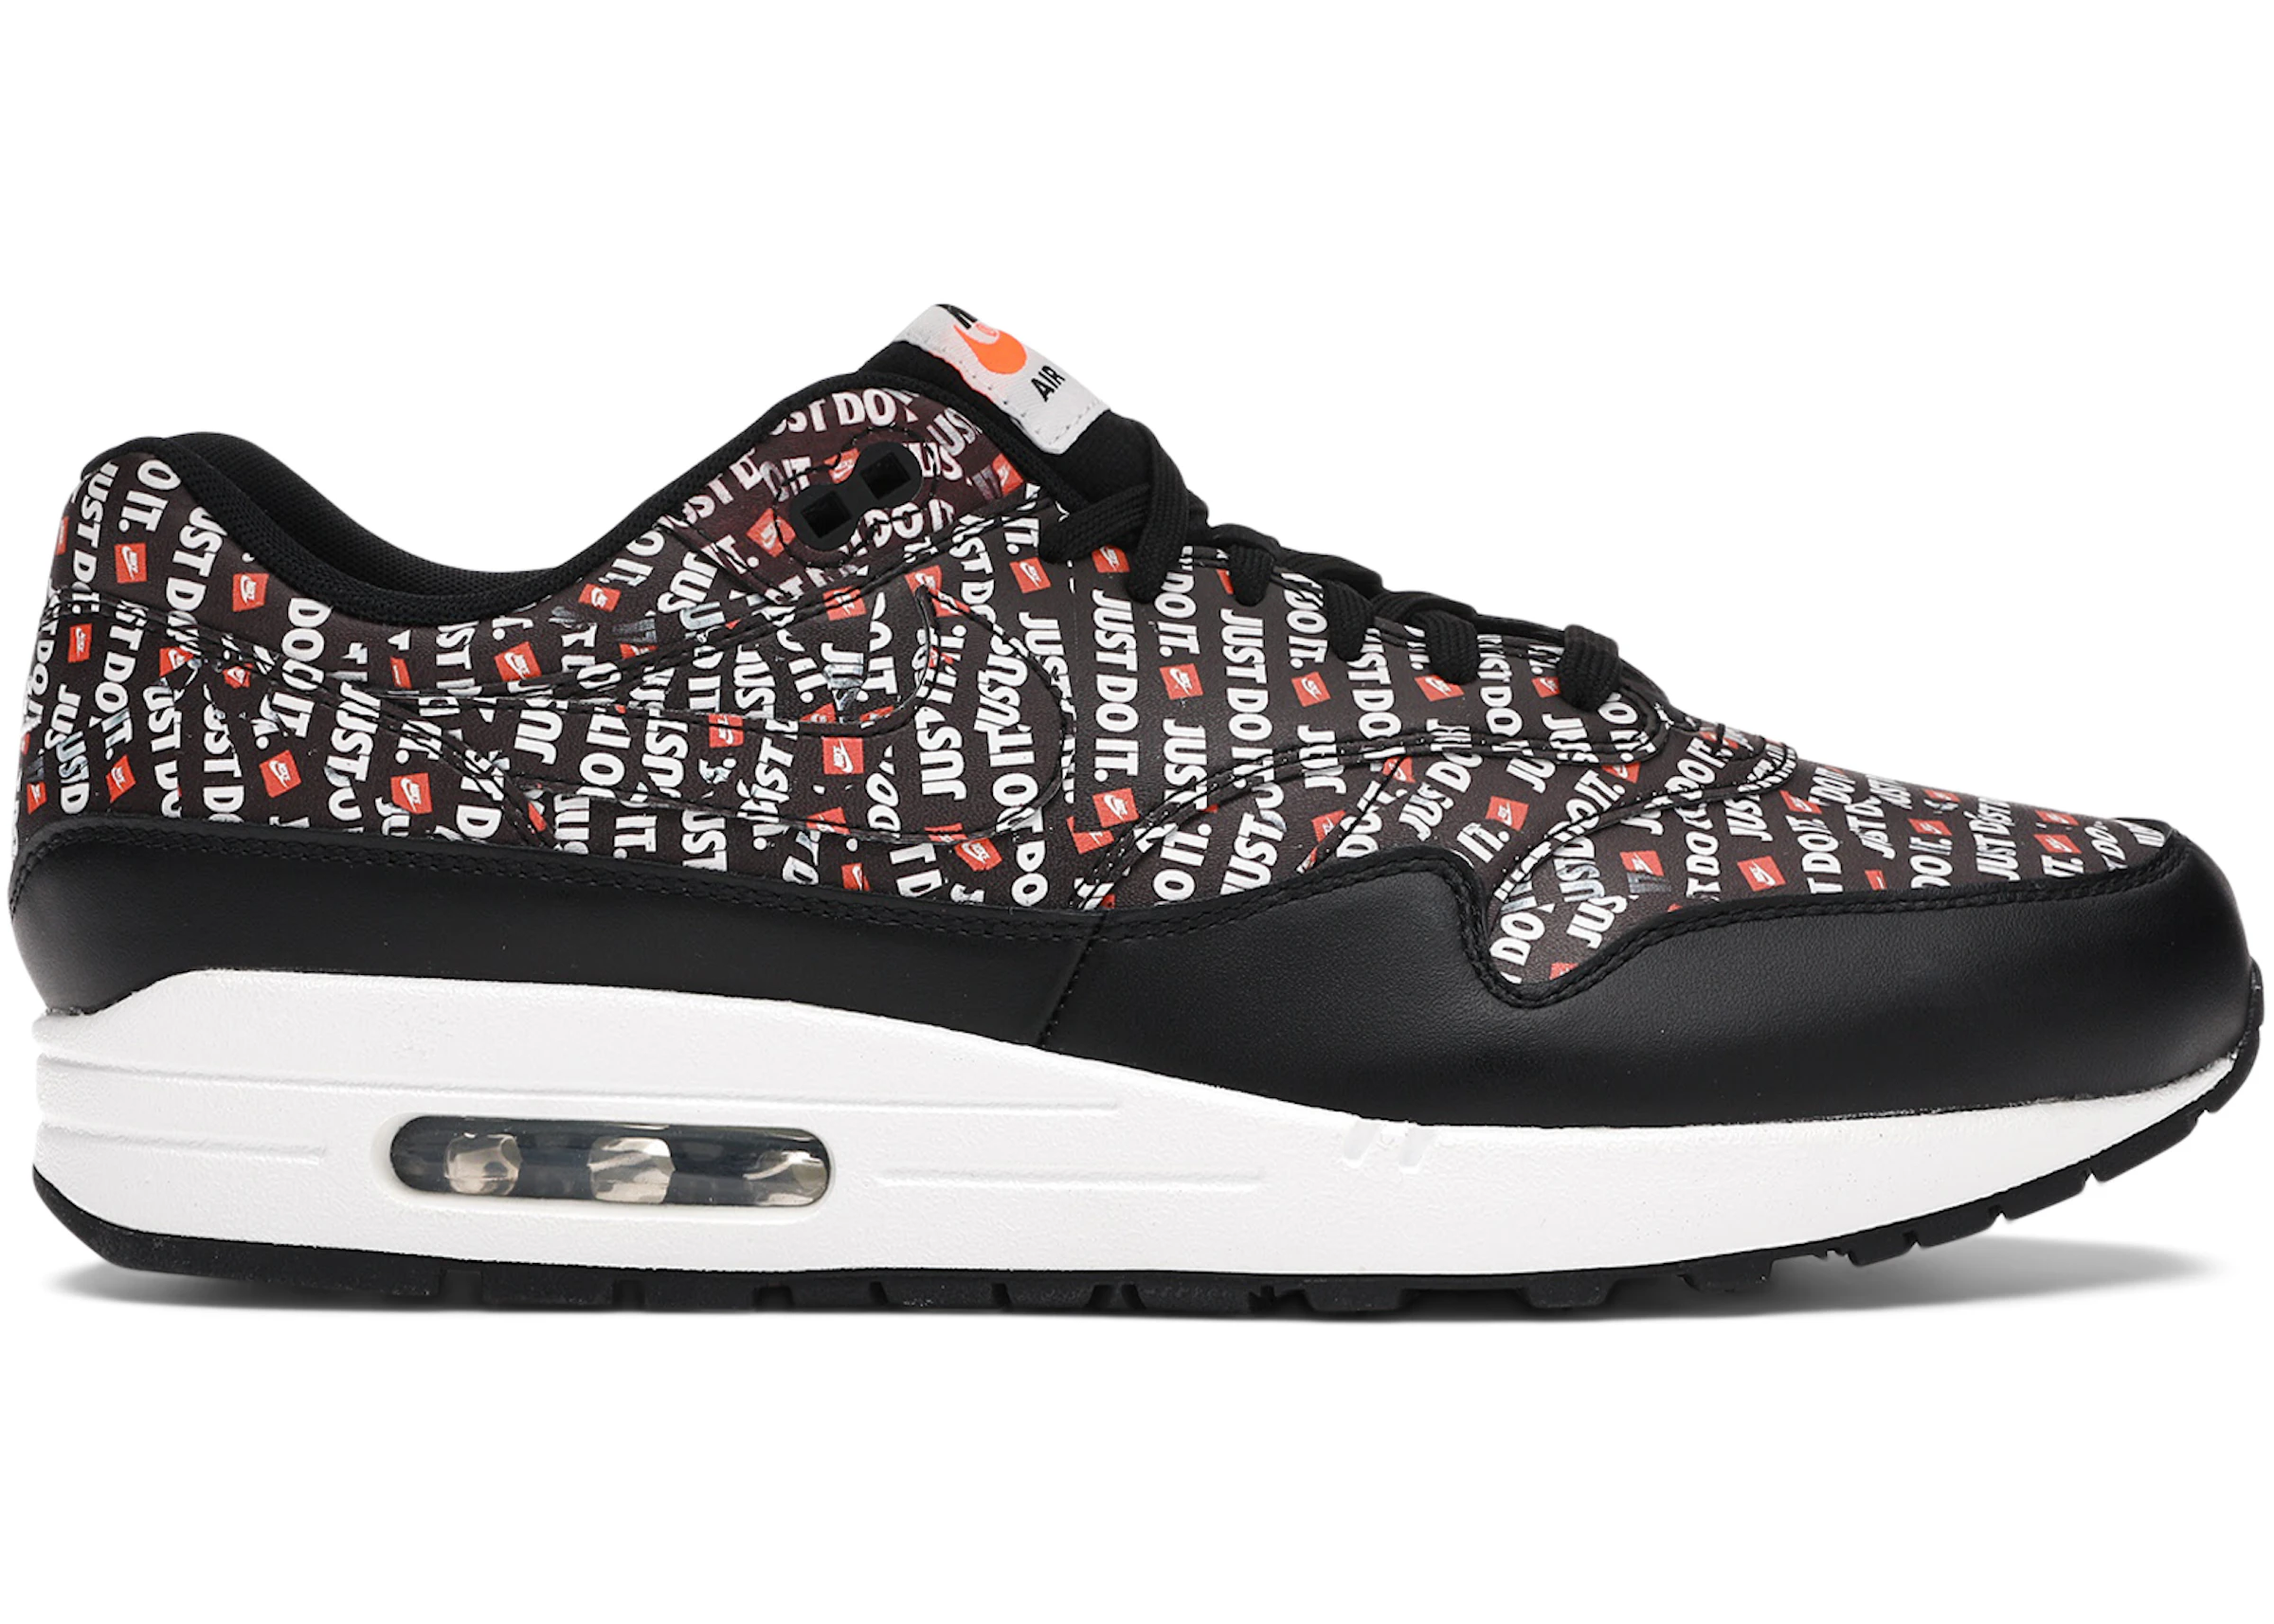 Verniel operator Publiciteit Nike Air Max 1 Just Do It Pack Black - 875844-009 - US